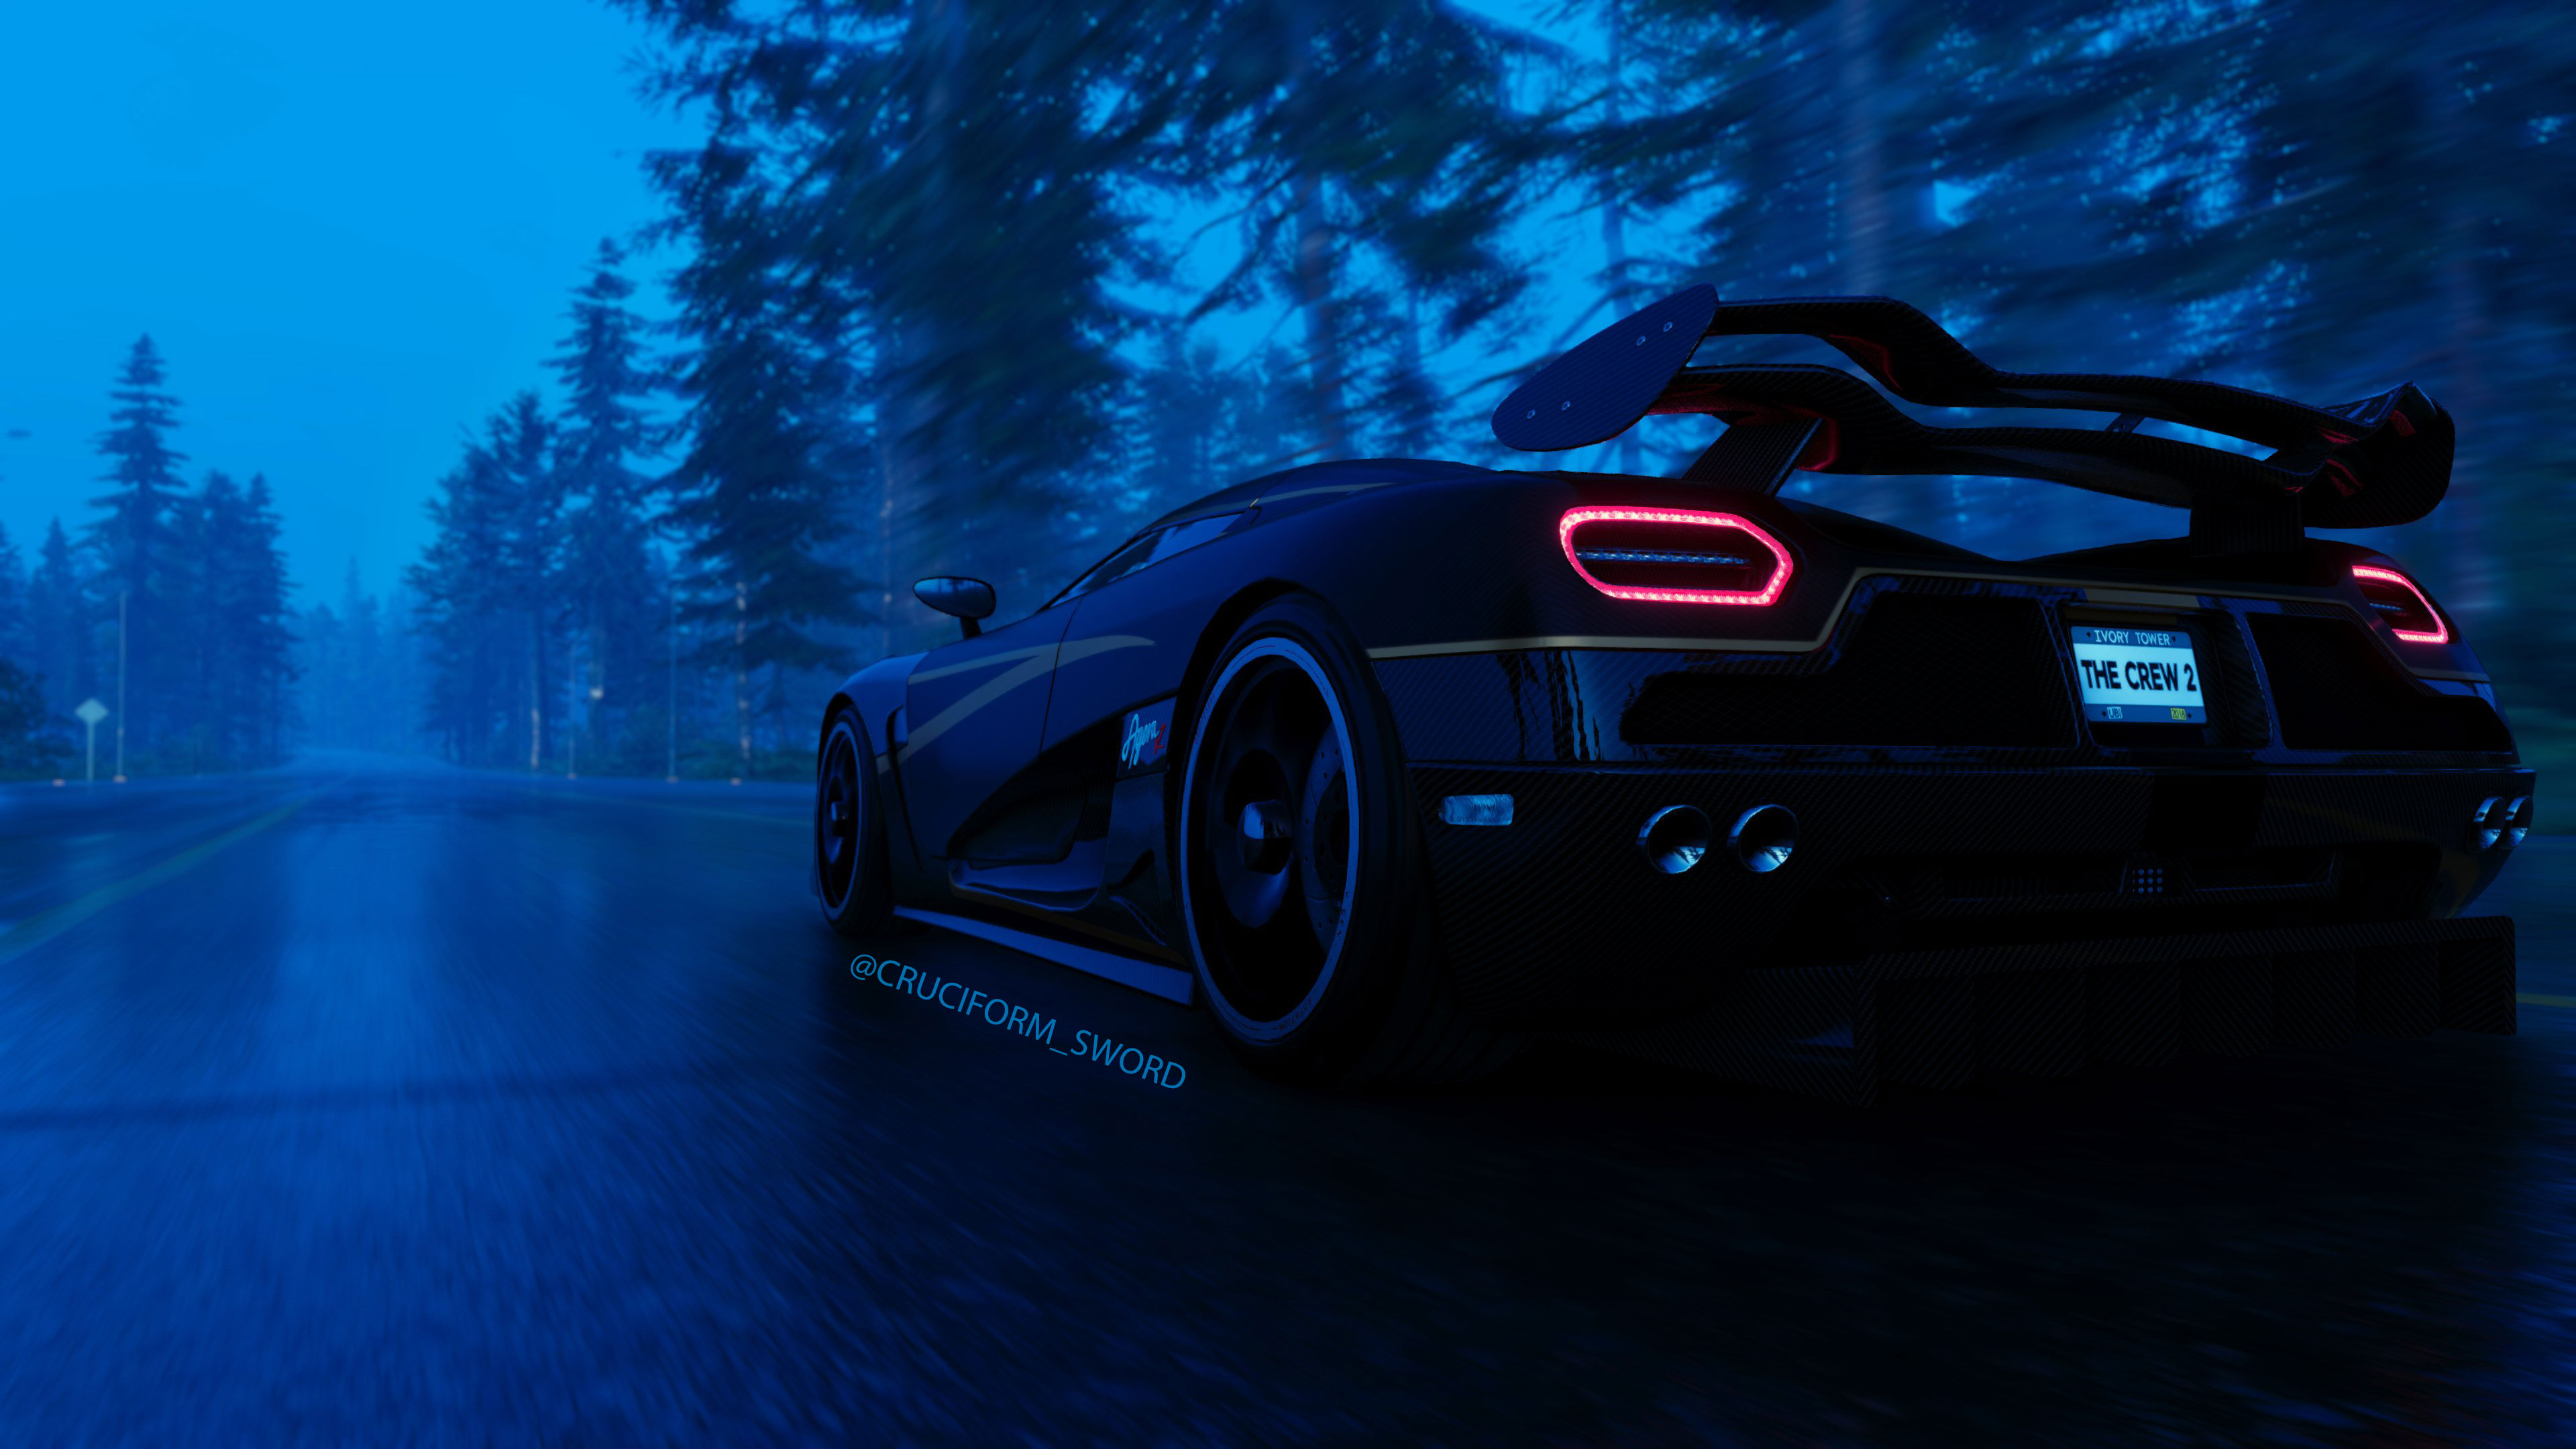 Game Poster The Crew 2 Koenigsegg Agera R Supercars Car Video Game Art The Crew Gamewallpapers Photo 3840x2160